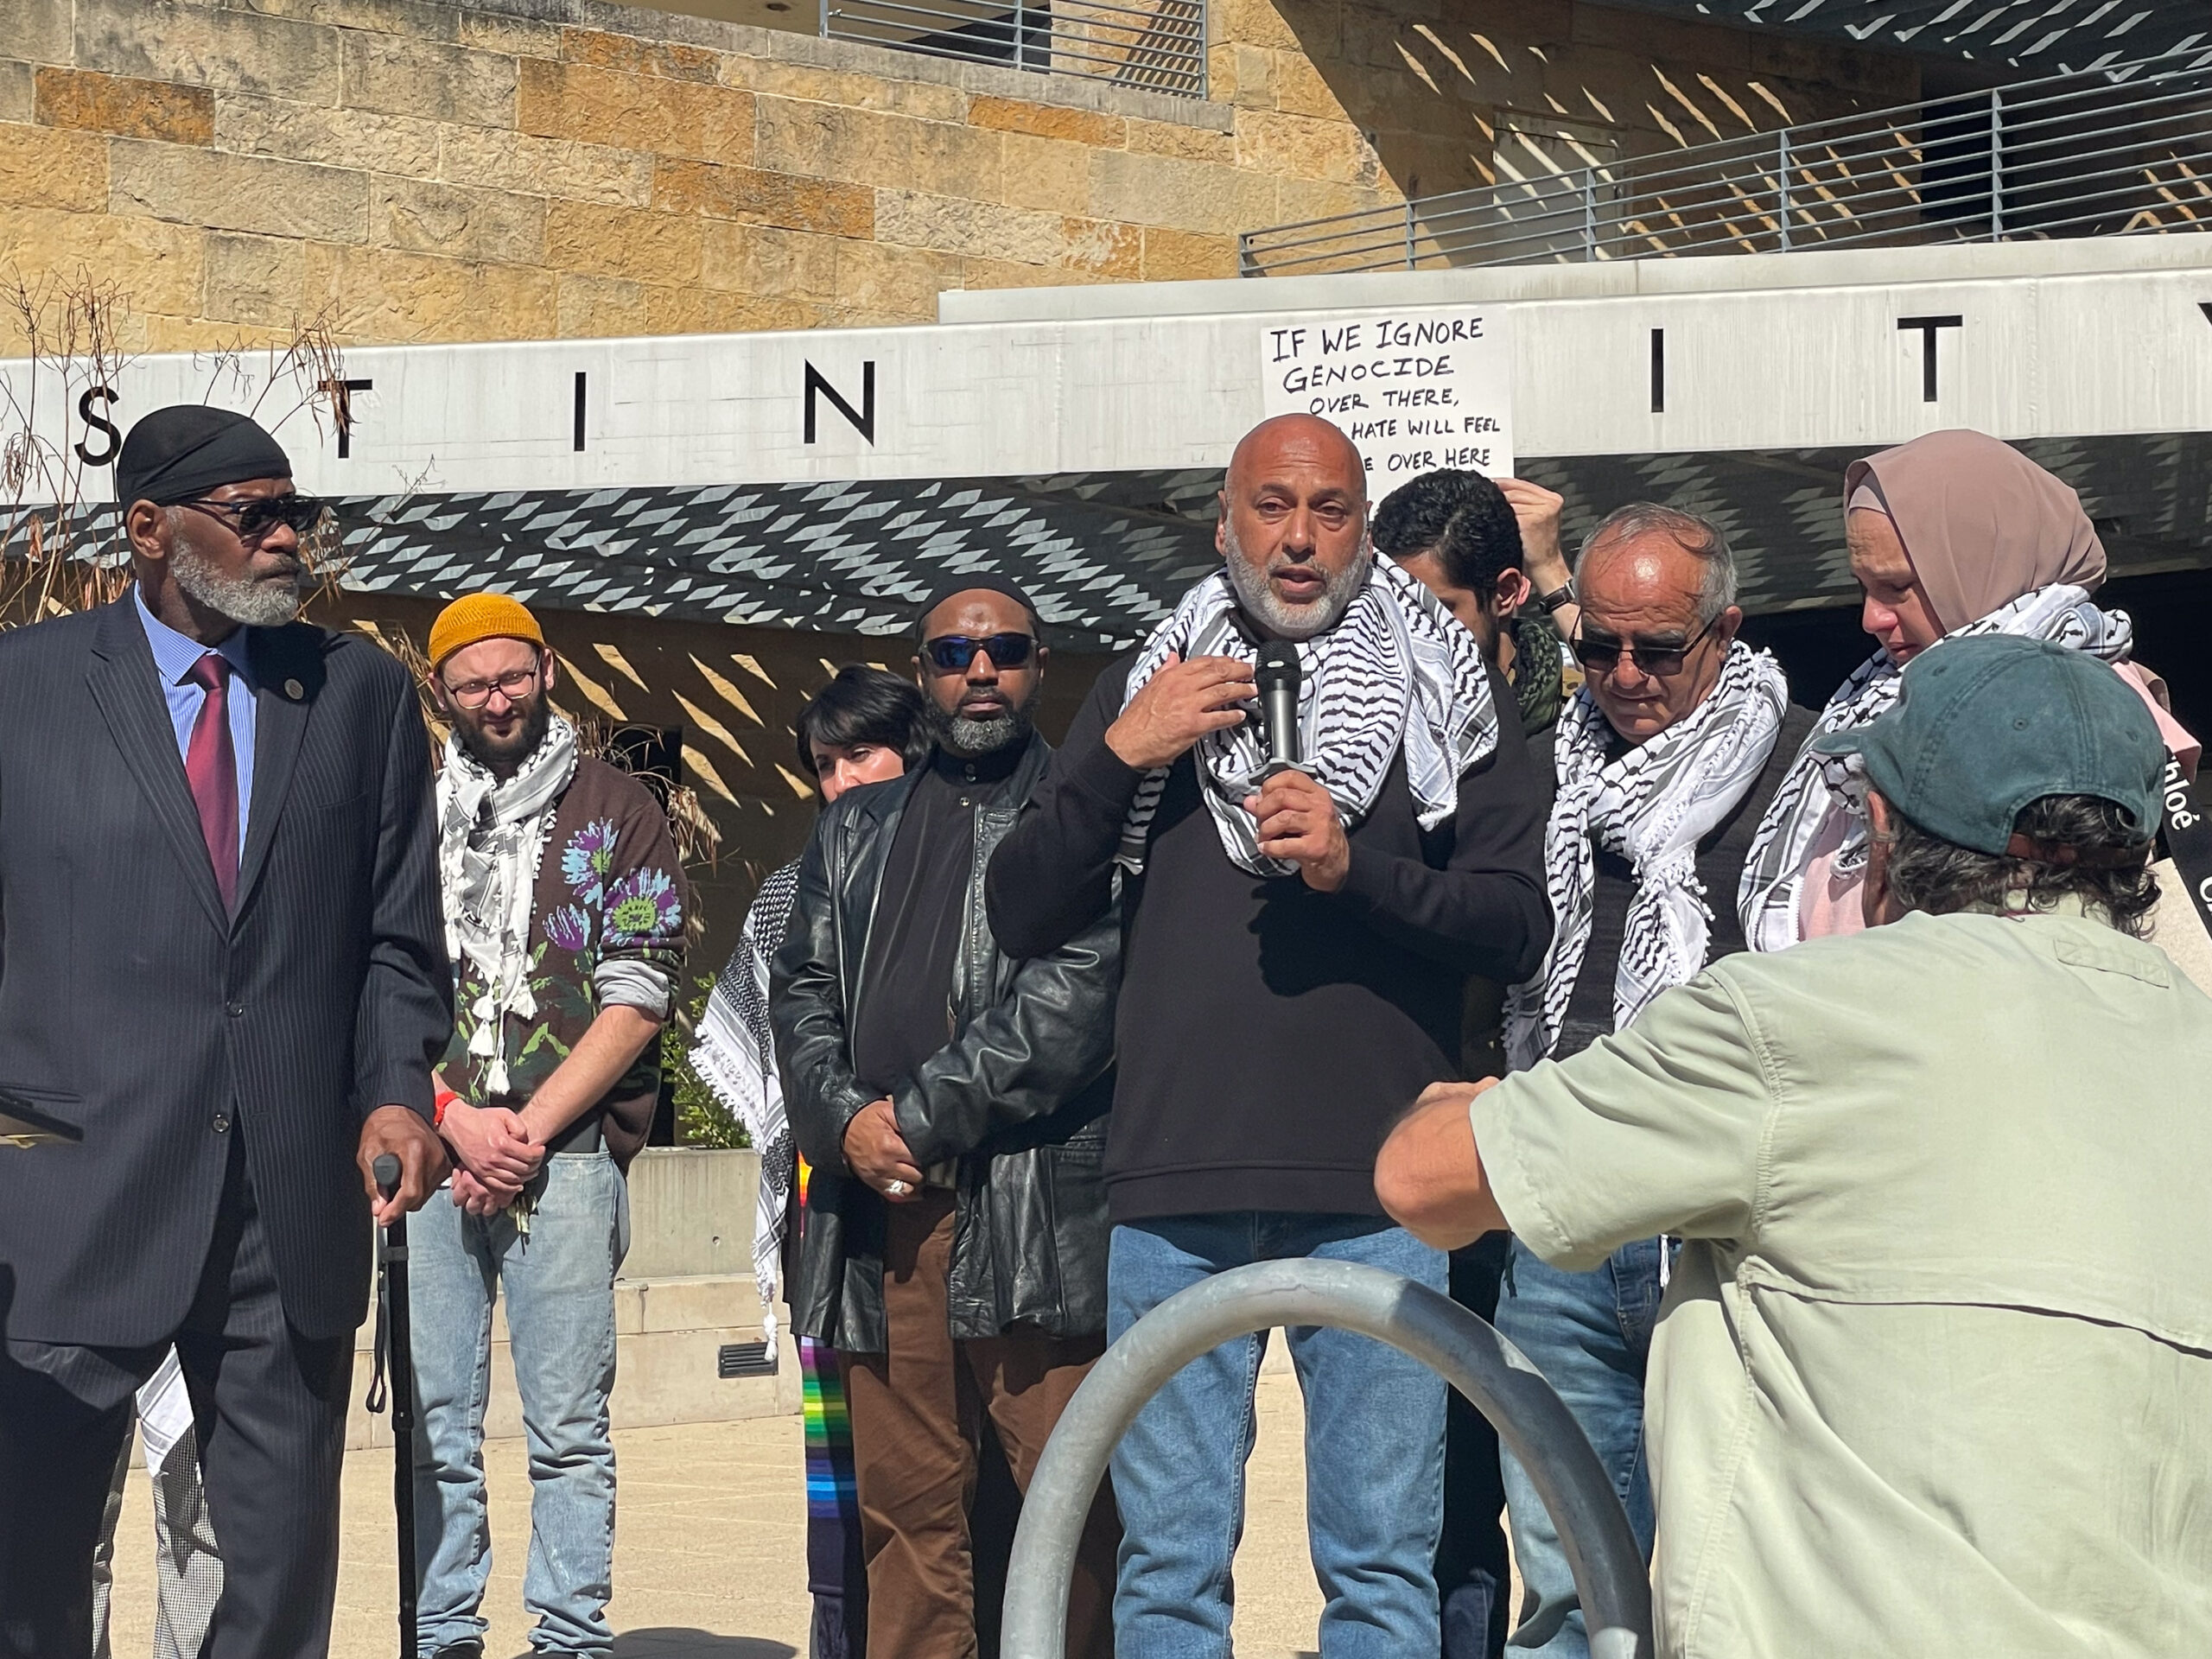 A man in a keffiyeh speaks emotionally into a microphone, surrounded by a diverse group of supporters, many of whom also wear Keffiyeh. They are standing directly outside the entrance to Austin City Hall.